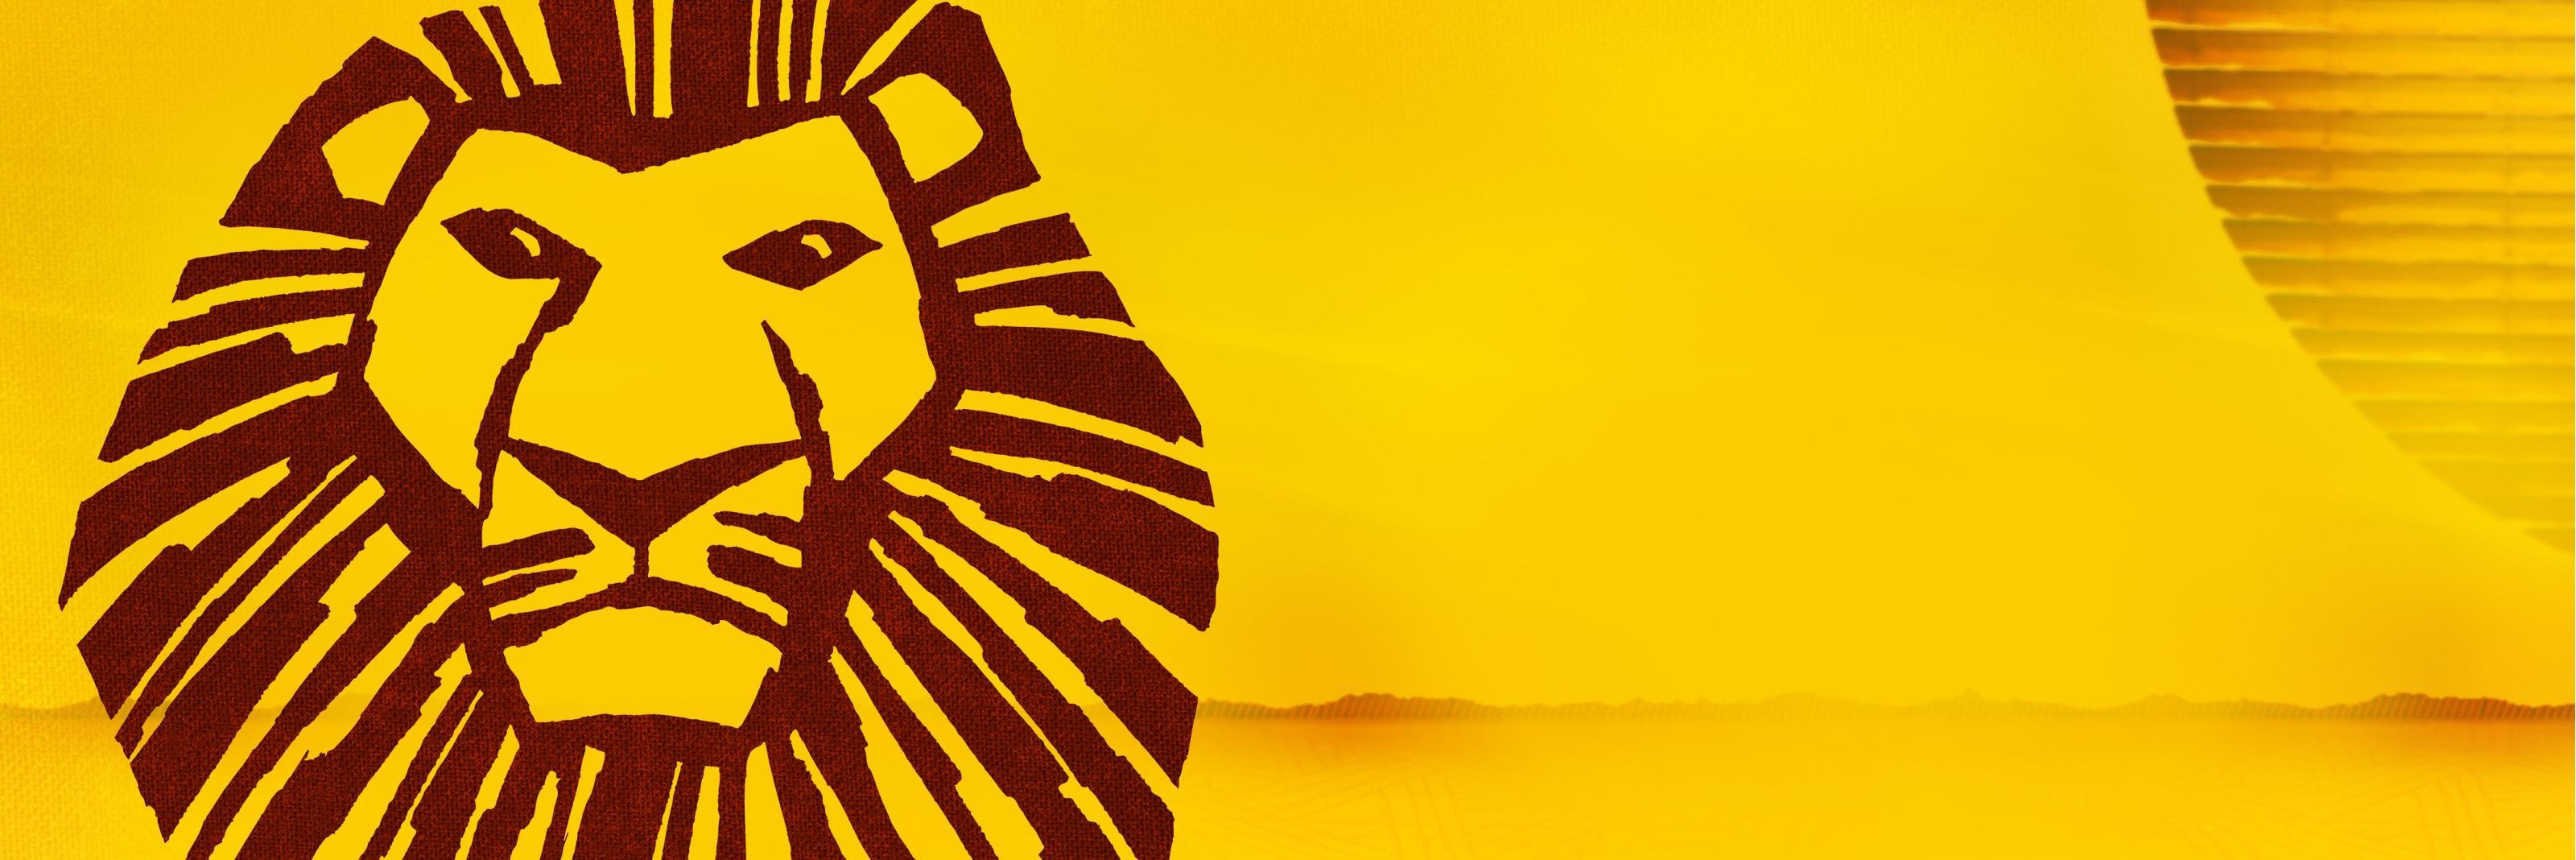 Book Tickets to The Lion King Tour